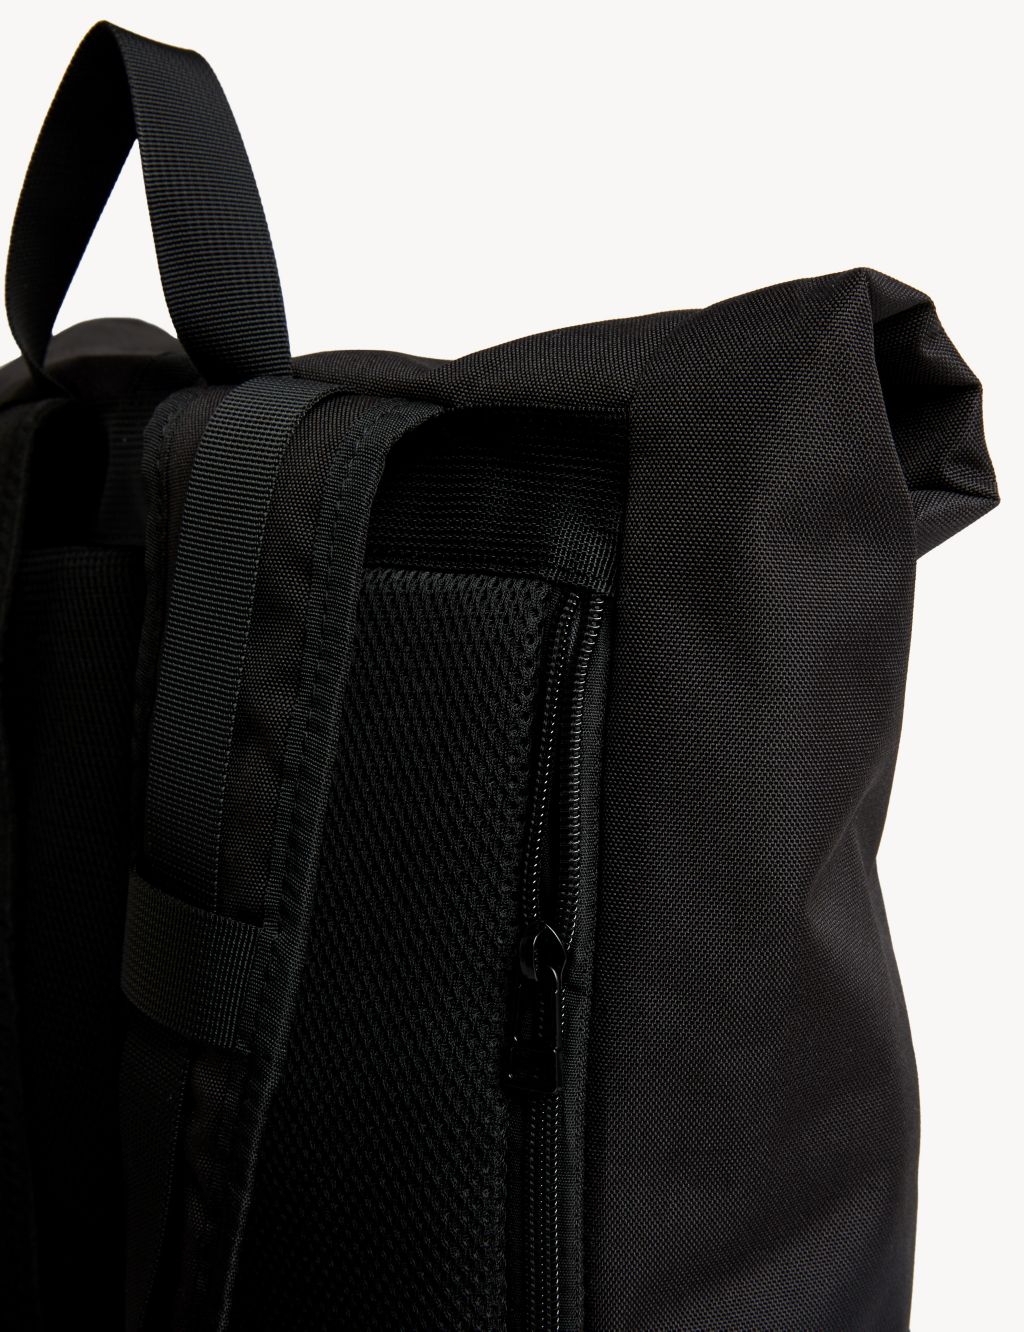 Recycled Polyester Pro-Tect™ Backpack image 2